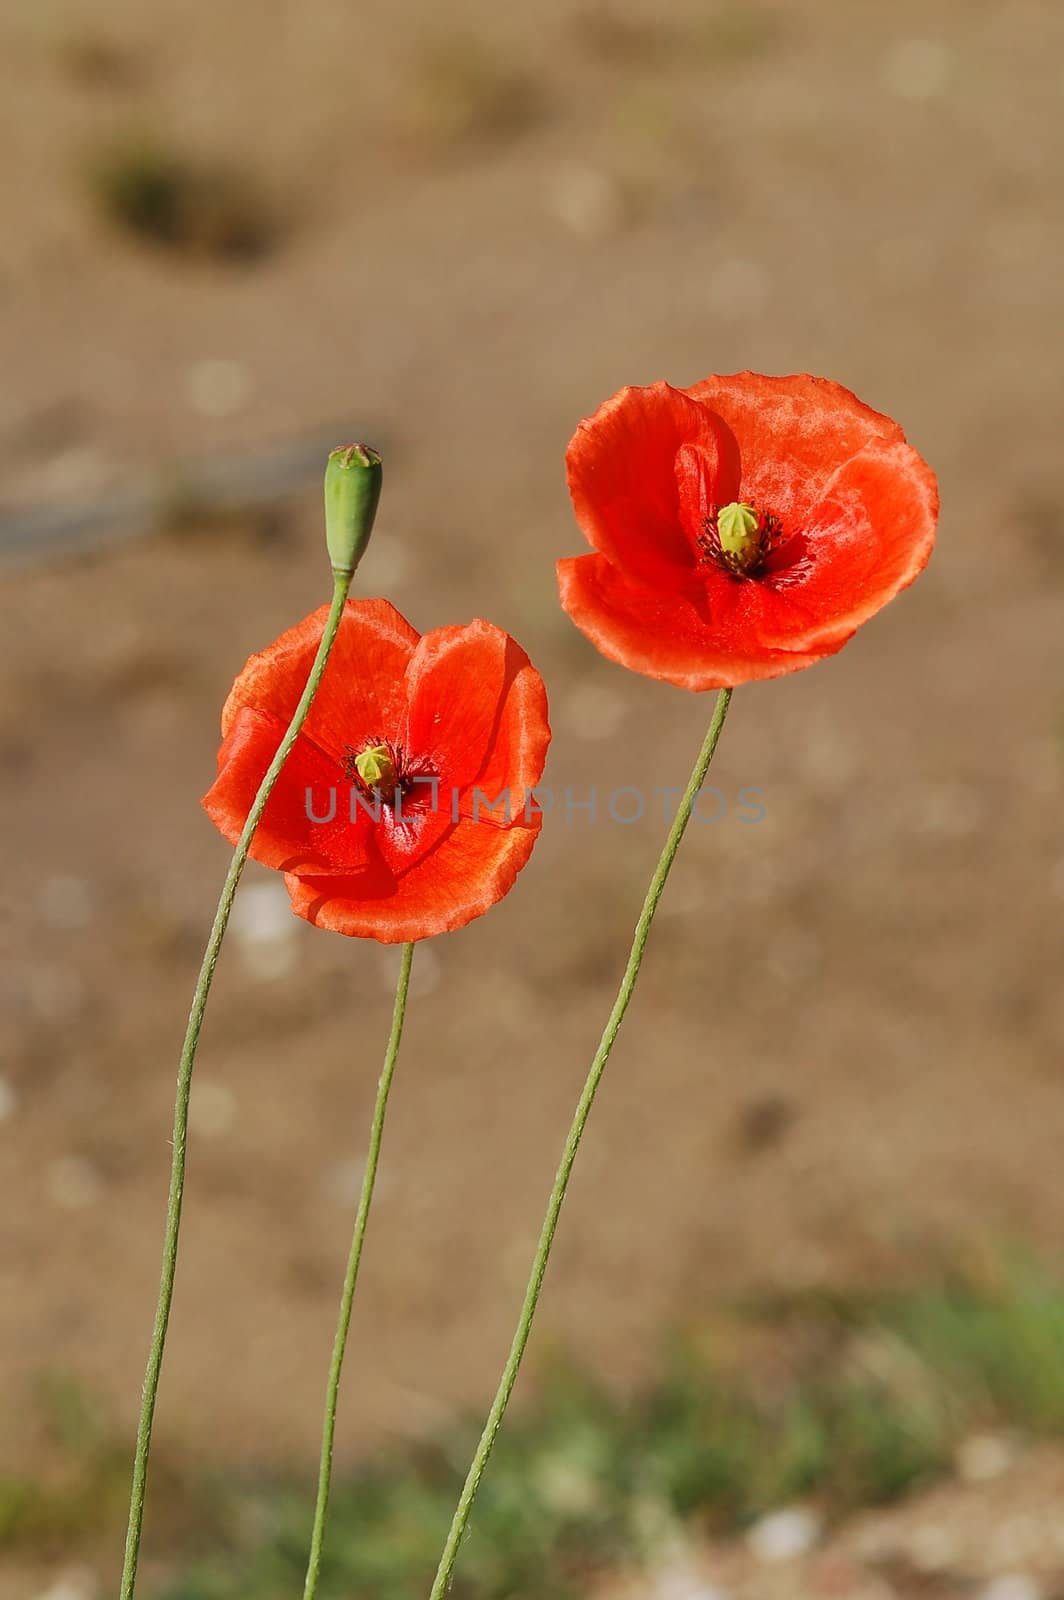 Beautiful red poppies blooming